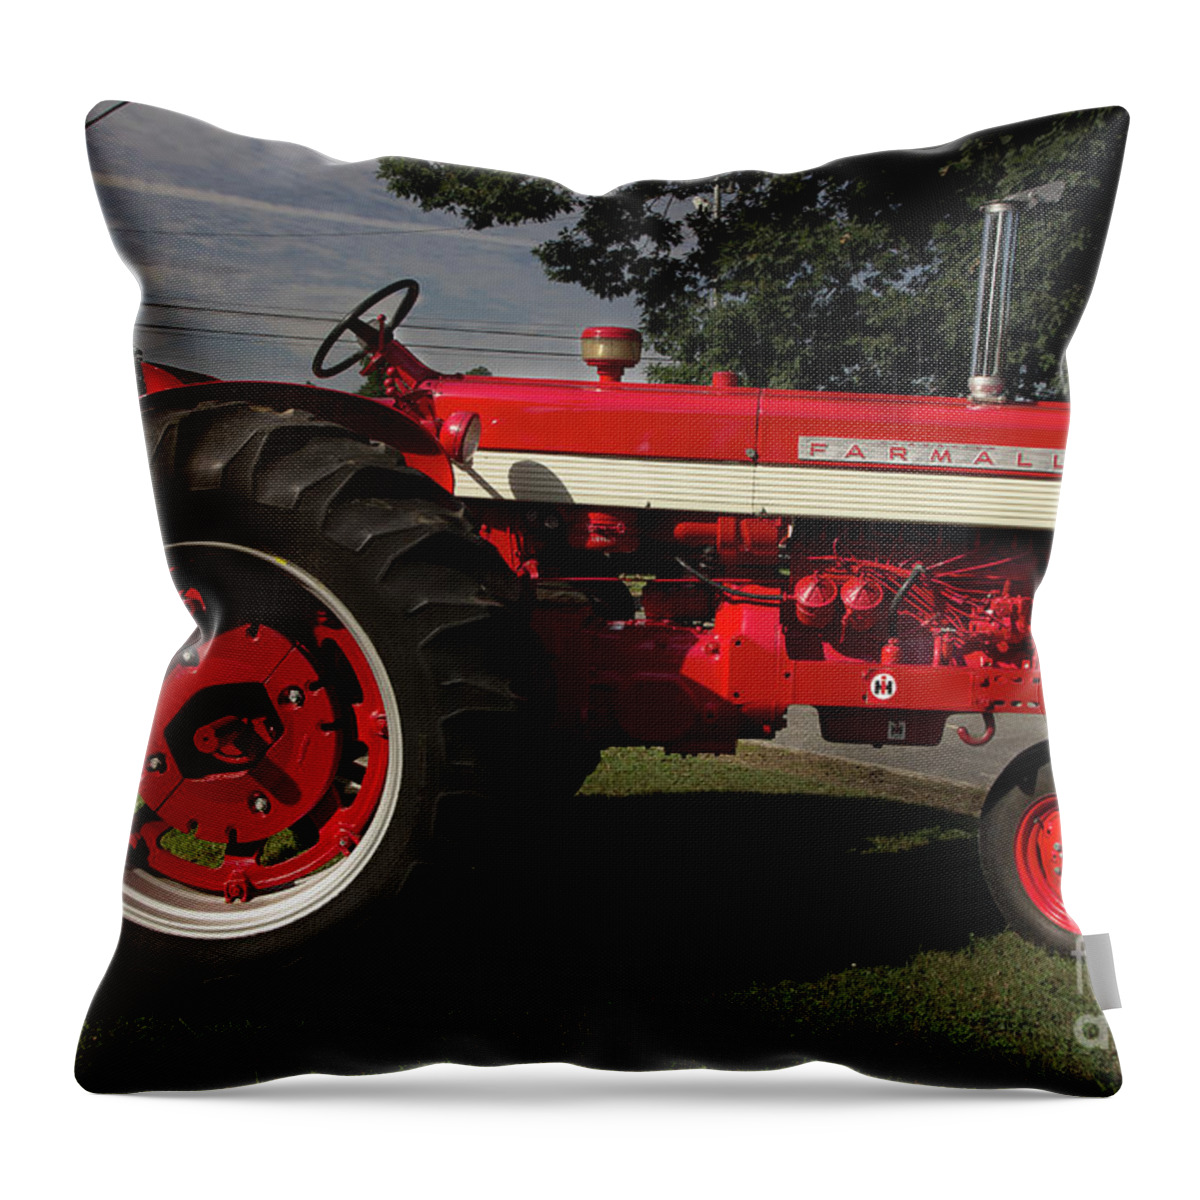 Tractor Throw Pillow featuring the photograph Farmall Turbo 560 by Mike Eingle